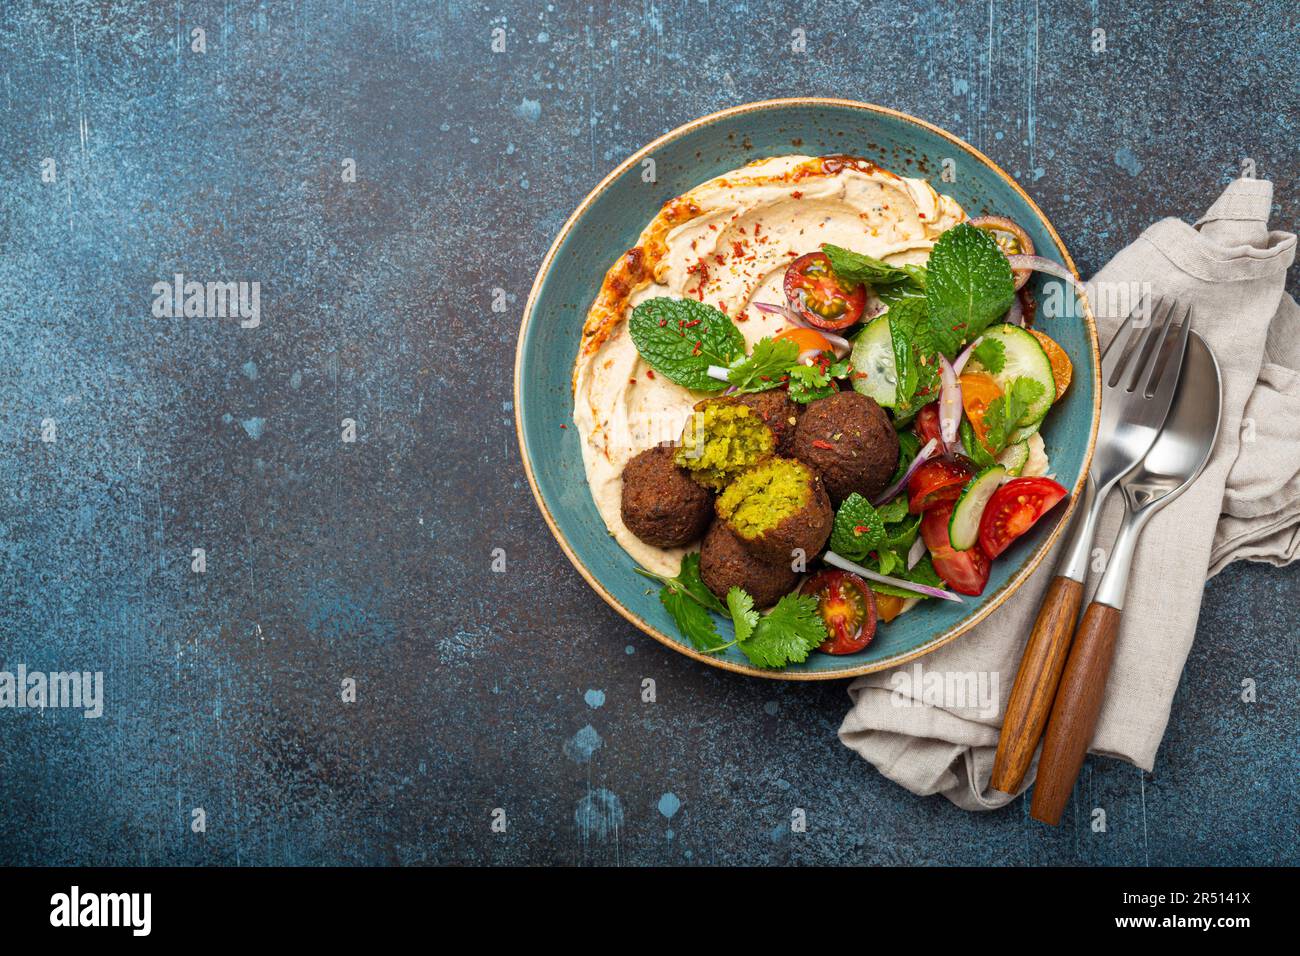 Arab meal with fried falafel, hummus, vegetables salad with fresh green cilantro and mint leaves (Middle Eastern) Stock Photo